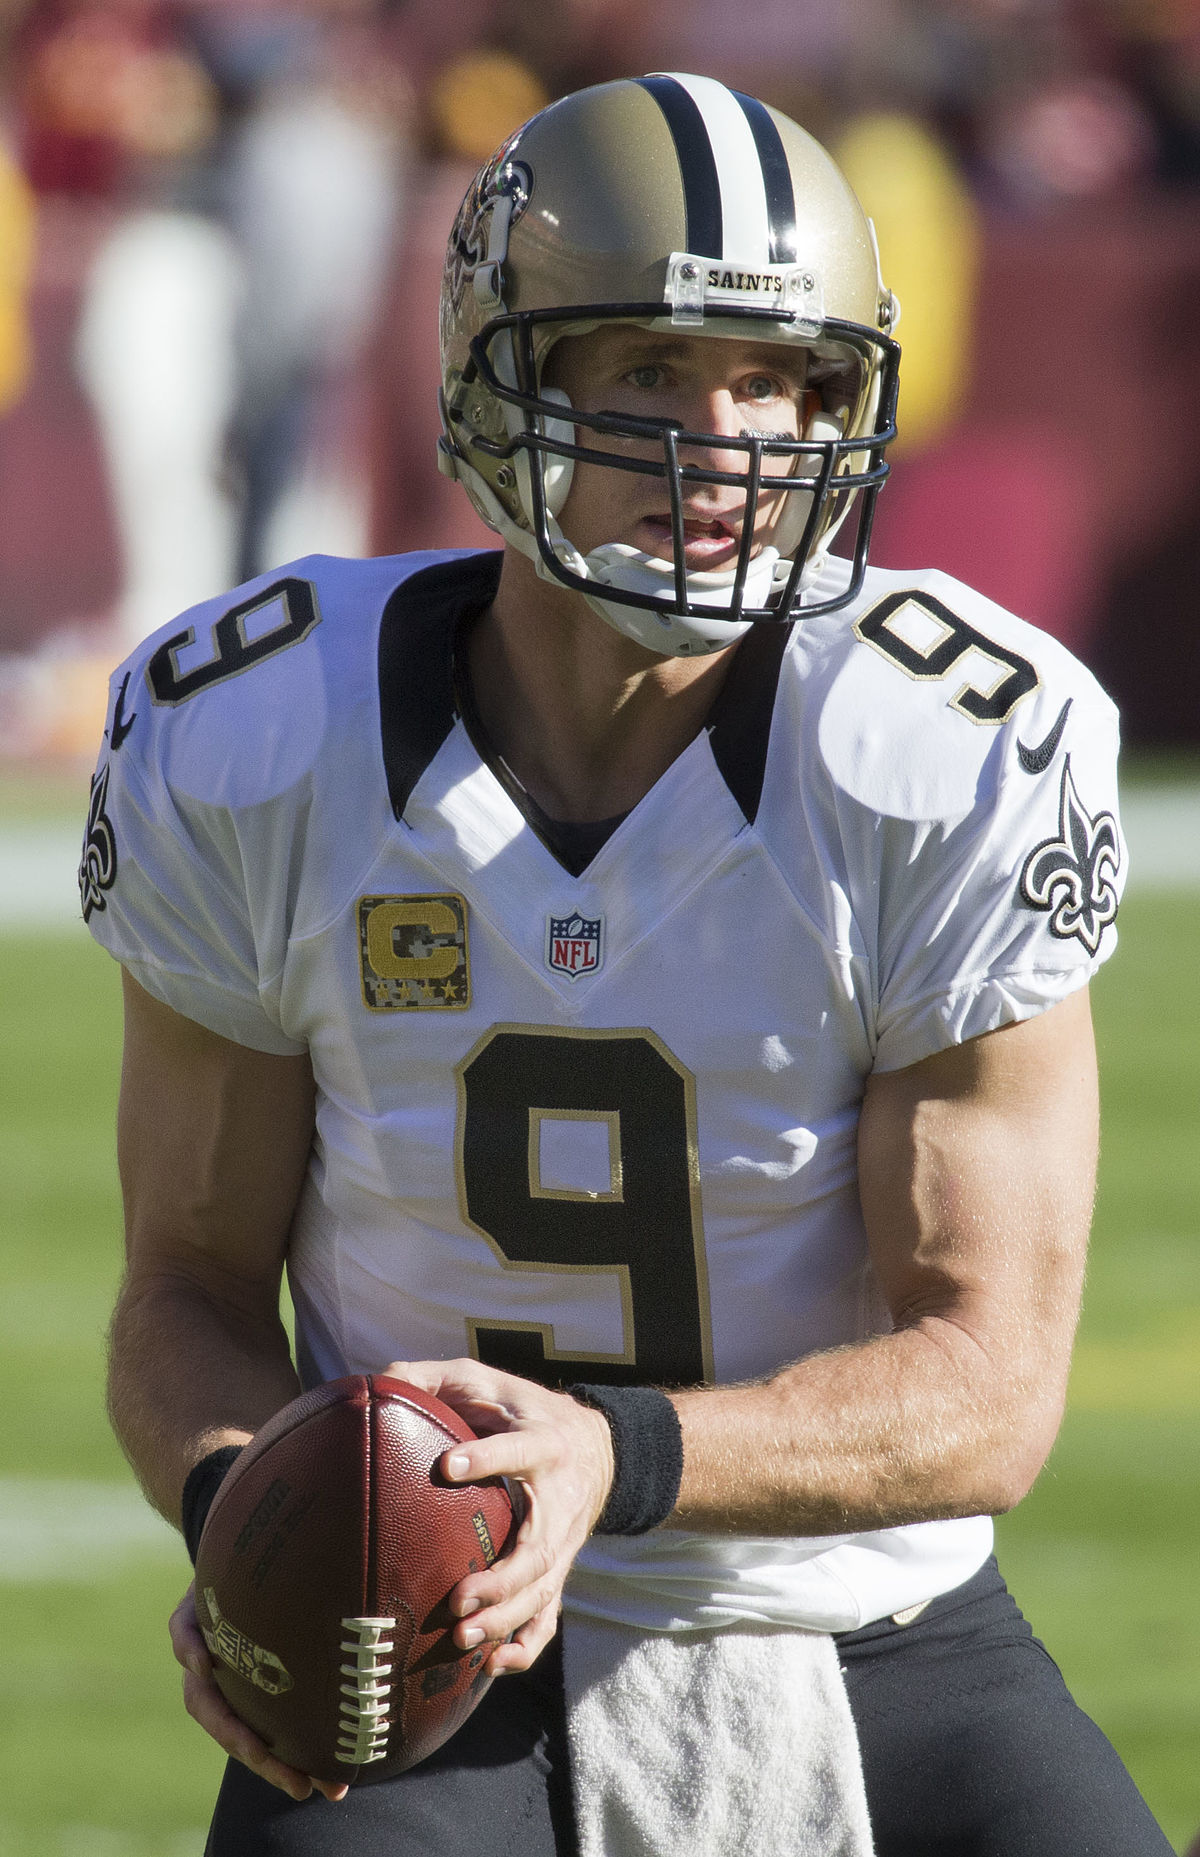  Drew Brees gets the gas face